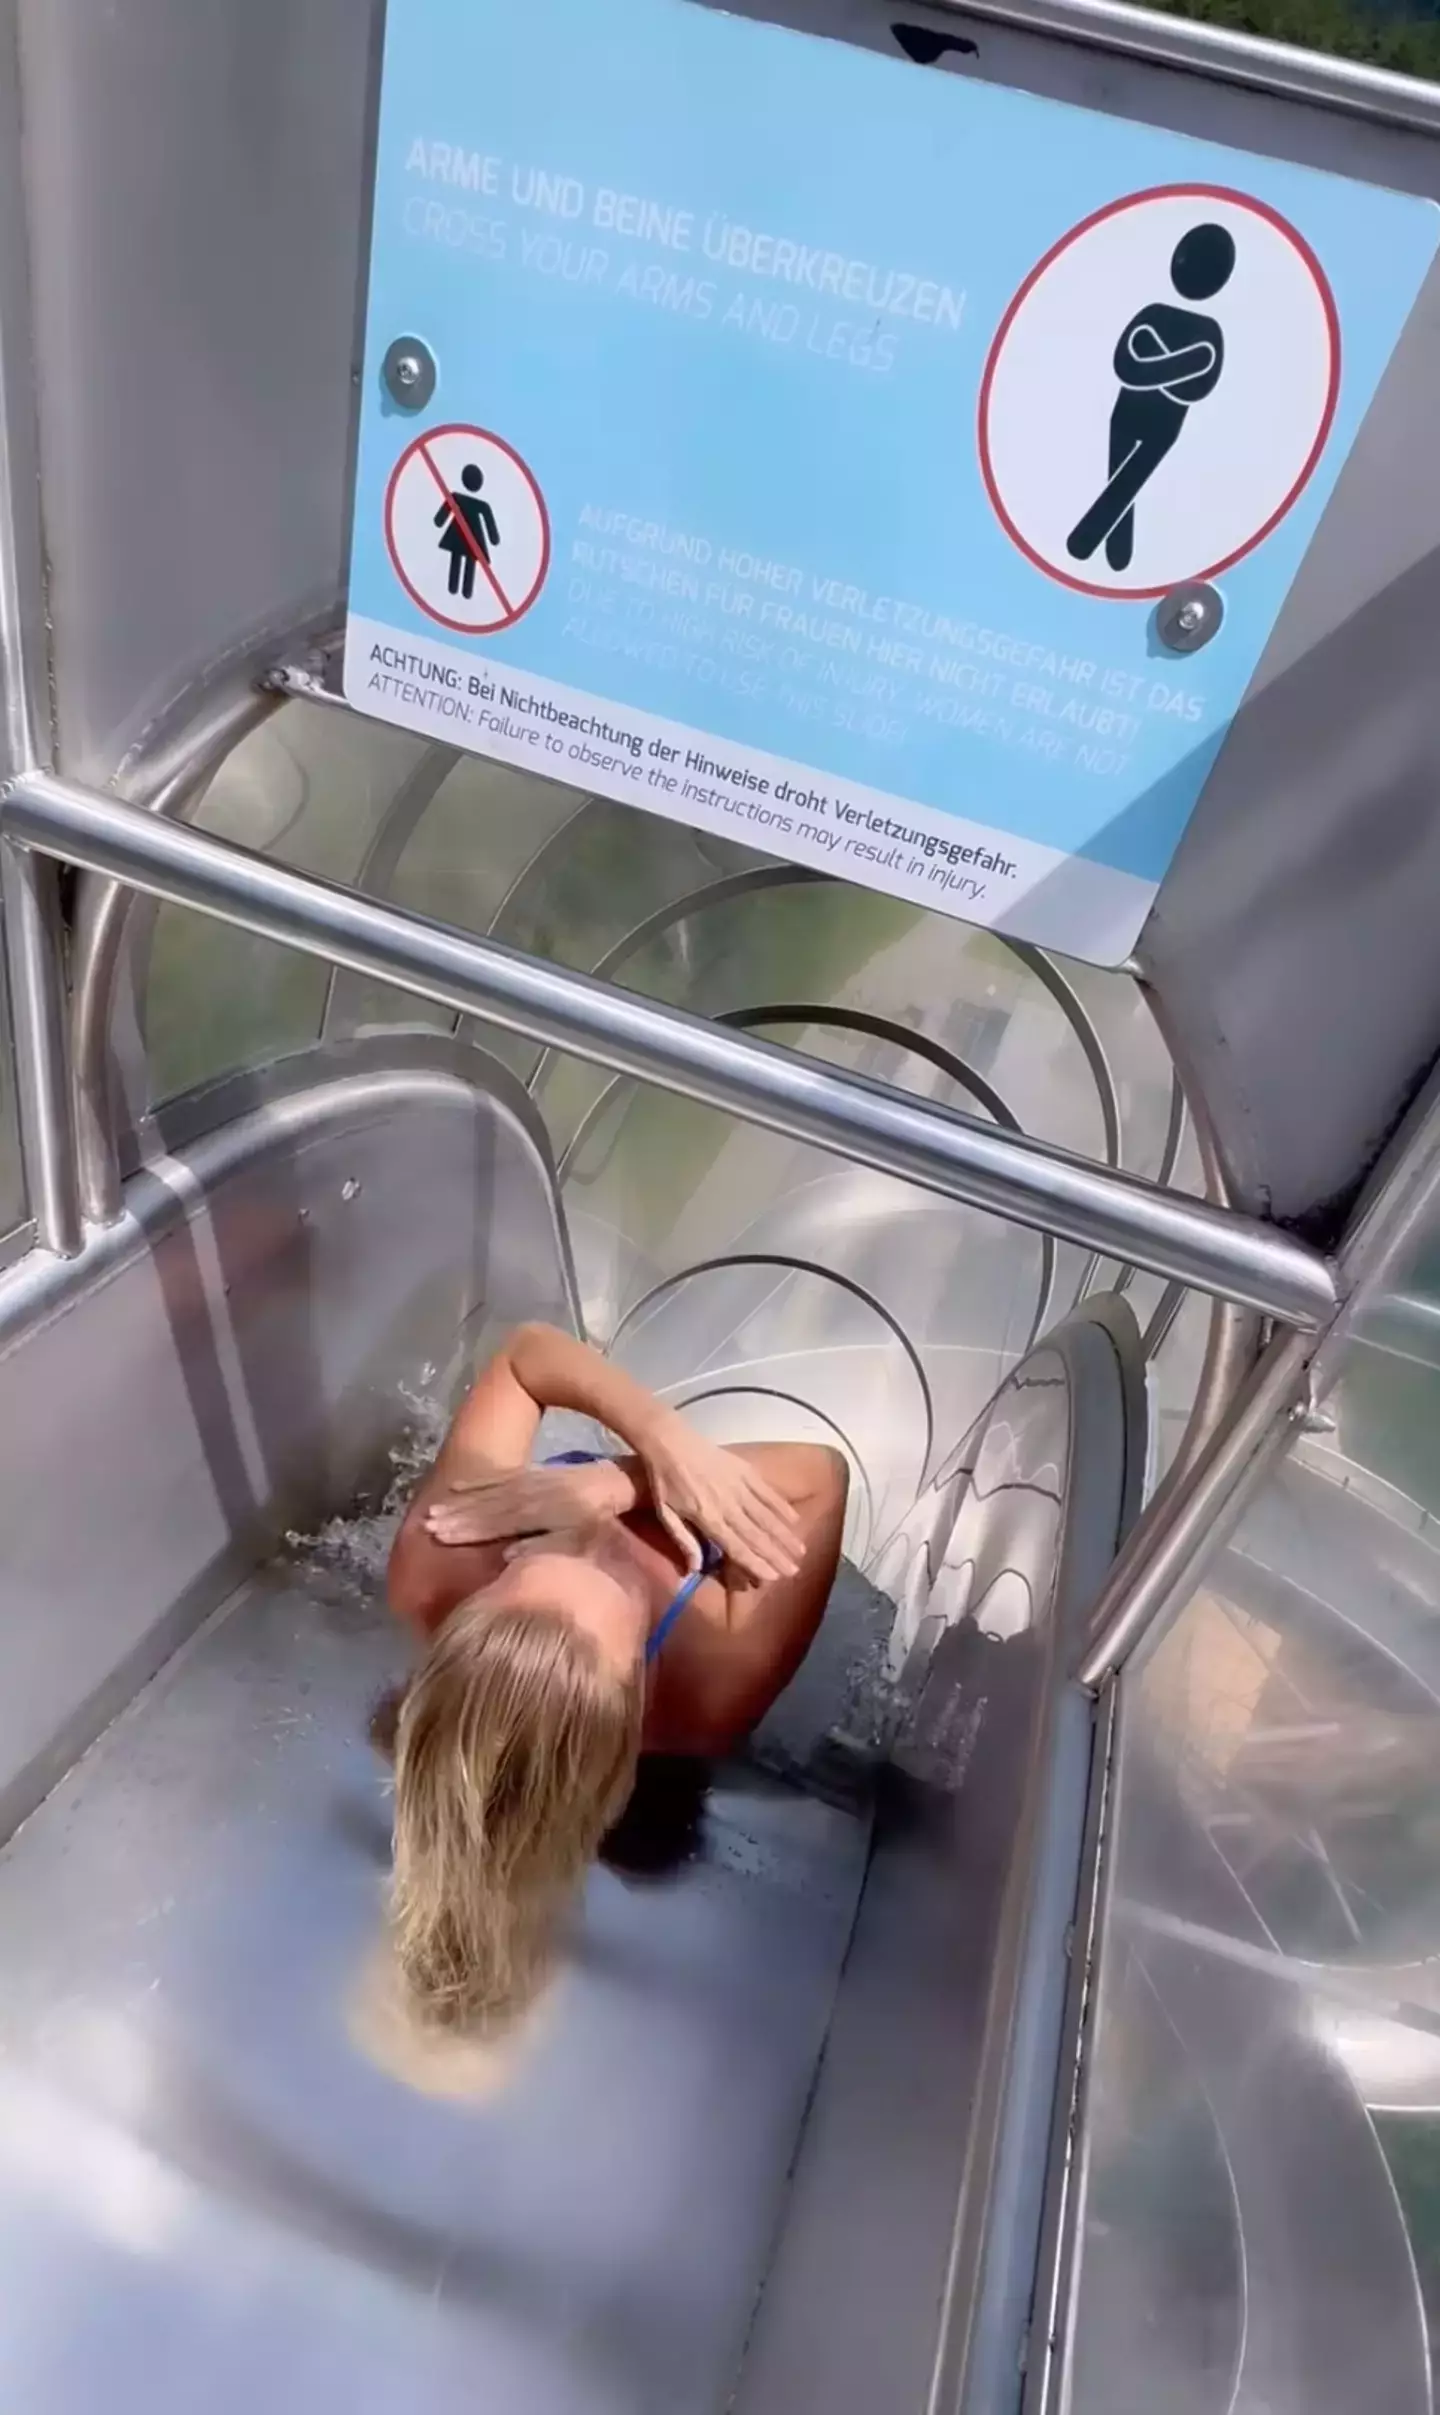 Seven-time world champion cliff diver, Rhiannan Iffland, ignored the sign and went down the 'male-only' slide. (Instagram/@rhiannan_iffland)